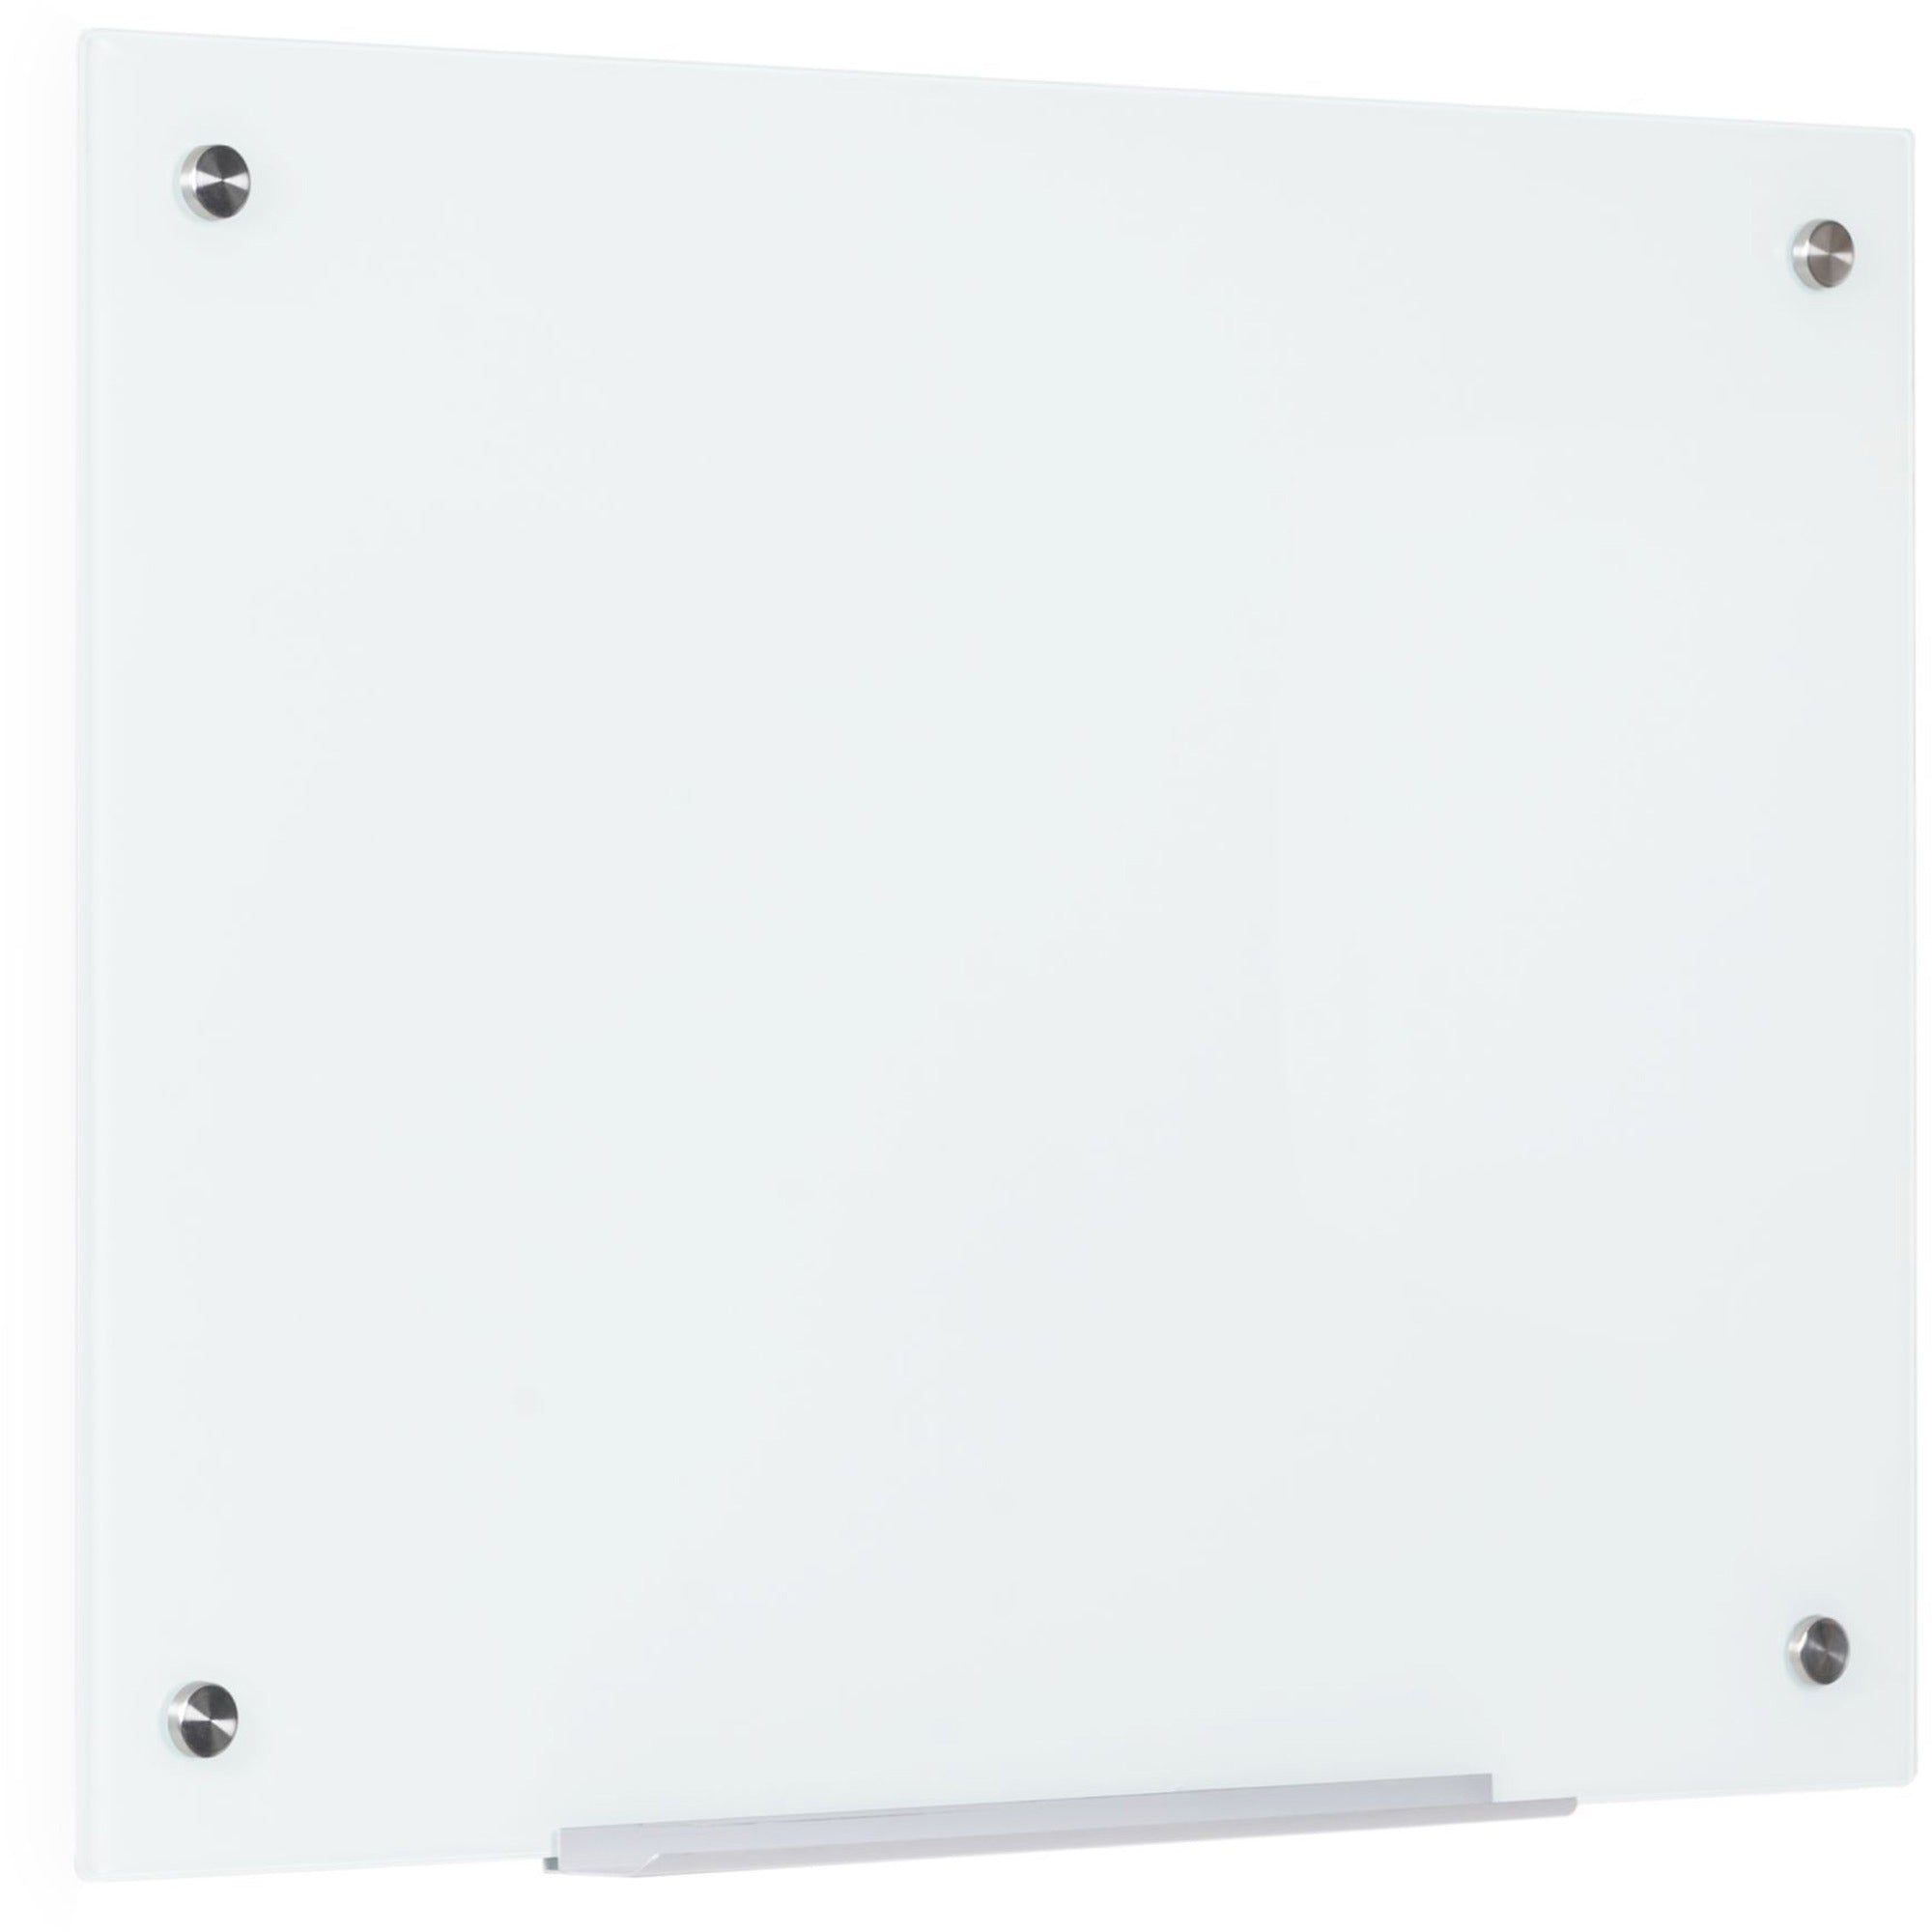 bi-silque-magnetic-glass-dry-erase-board-48-4-ft-width-x-72-6-ft-height-white-glass-surface-rectangle-horizontal-vertical-magnetic-1-each_bvcgl120107 - 4